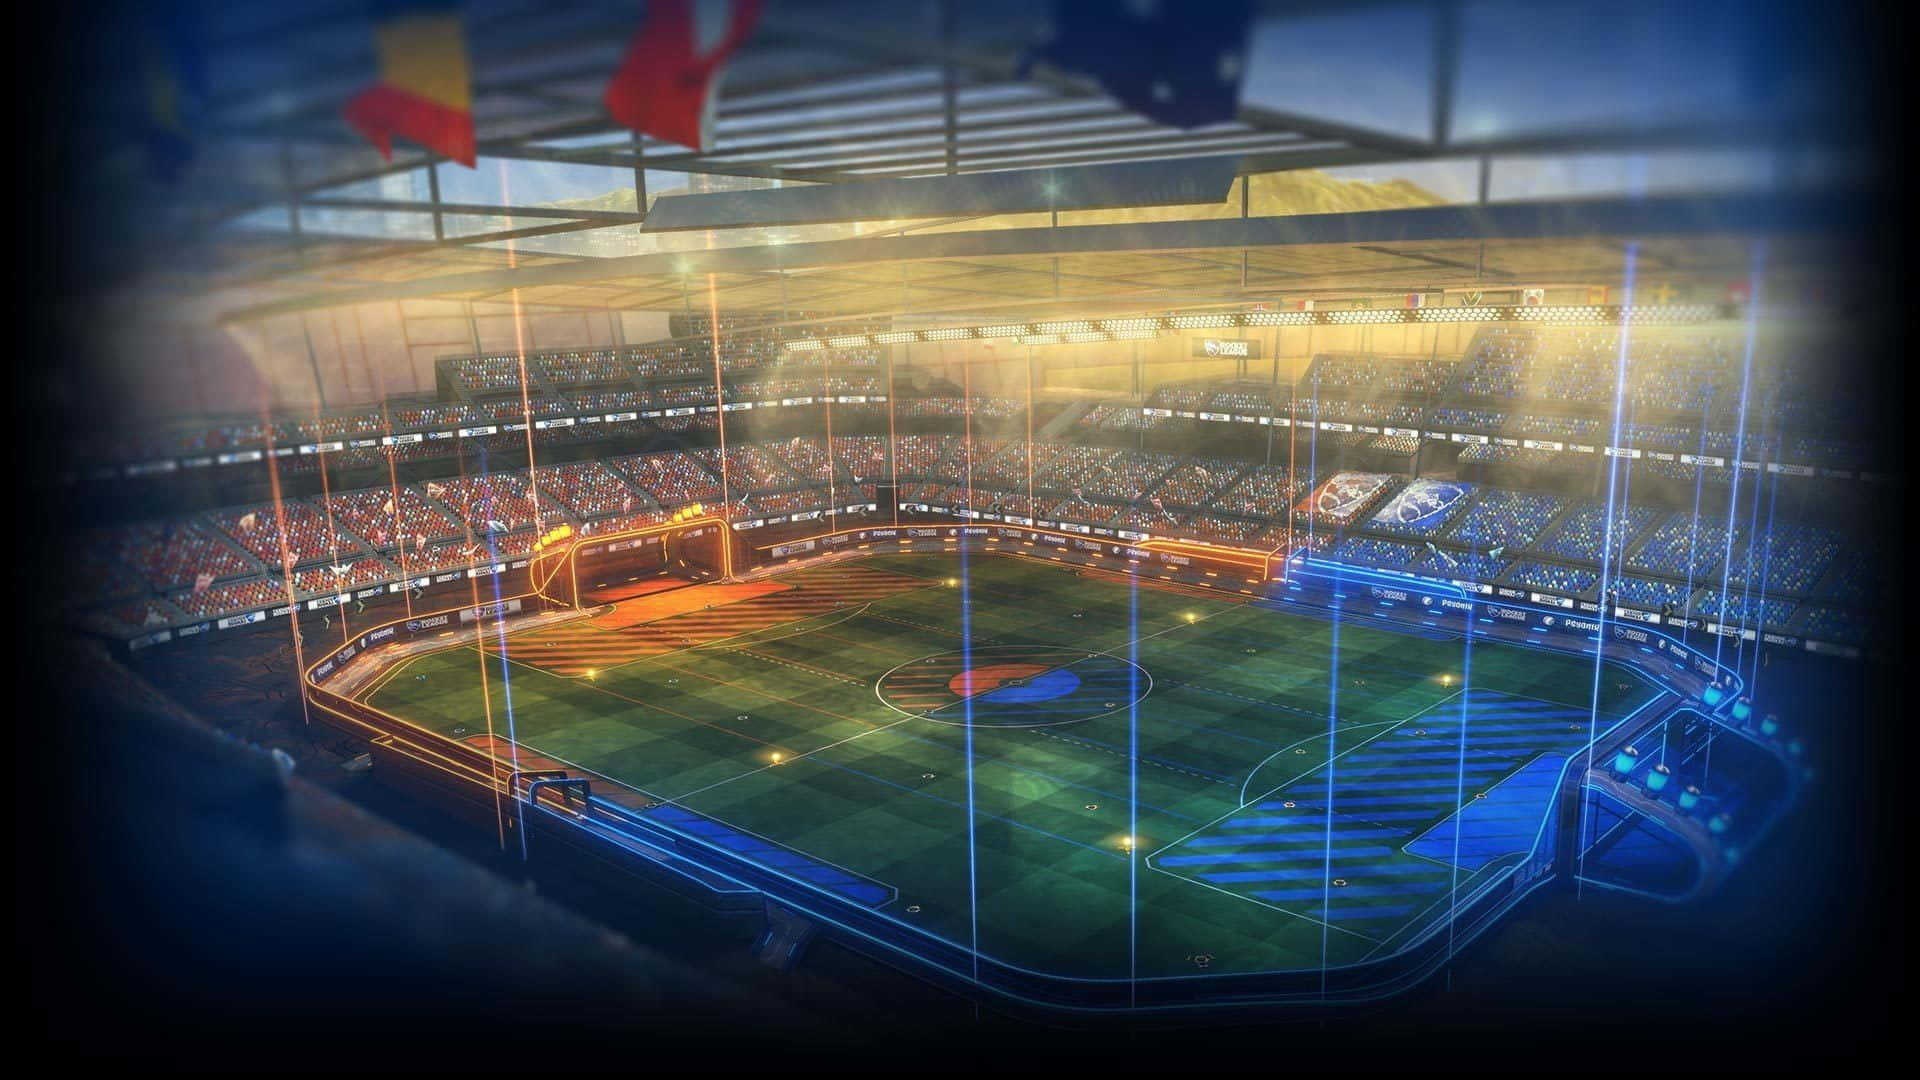 Get ready for intense rocket-fueled action in Rocket League with stunning 1080p graphics